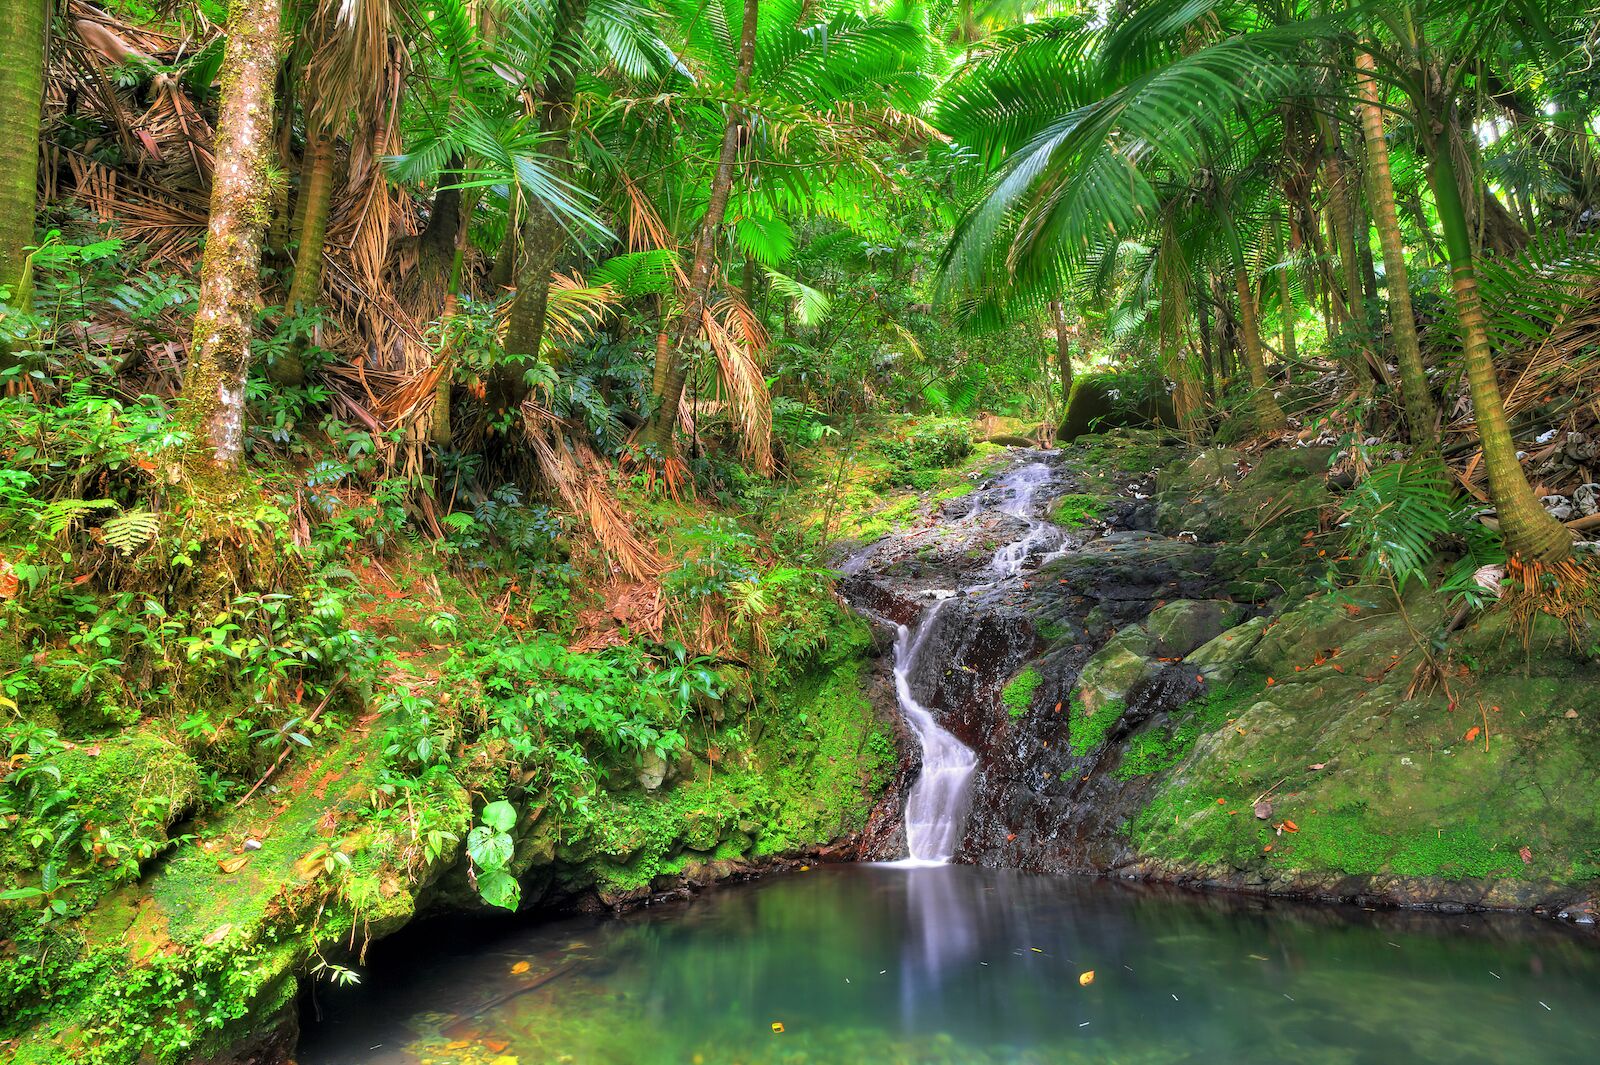 Small cascade in El Yunque national forest, Puerto Rico